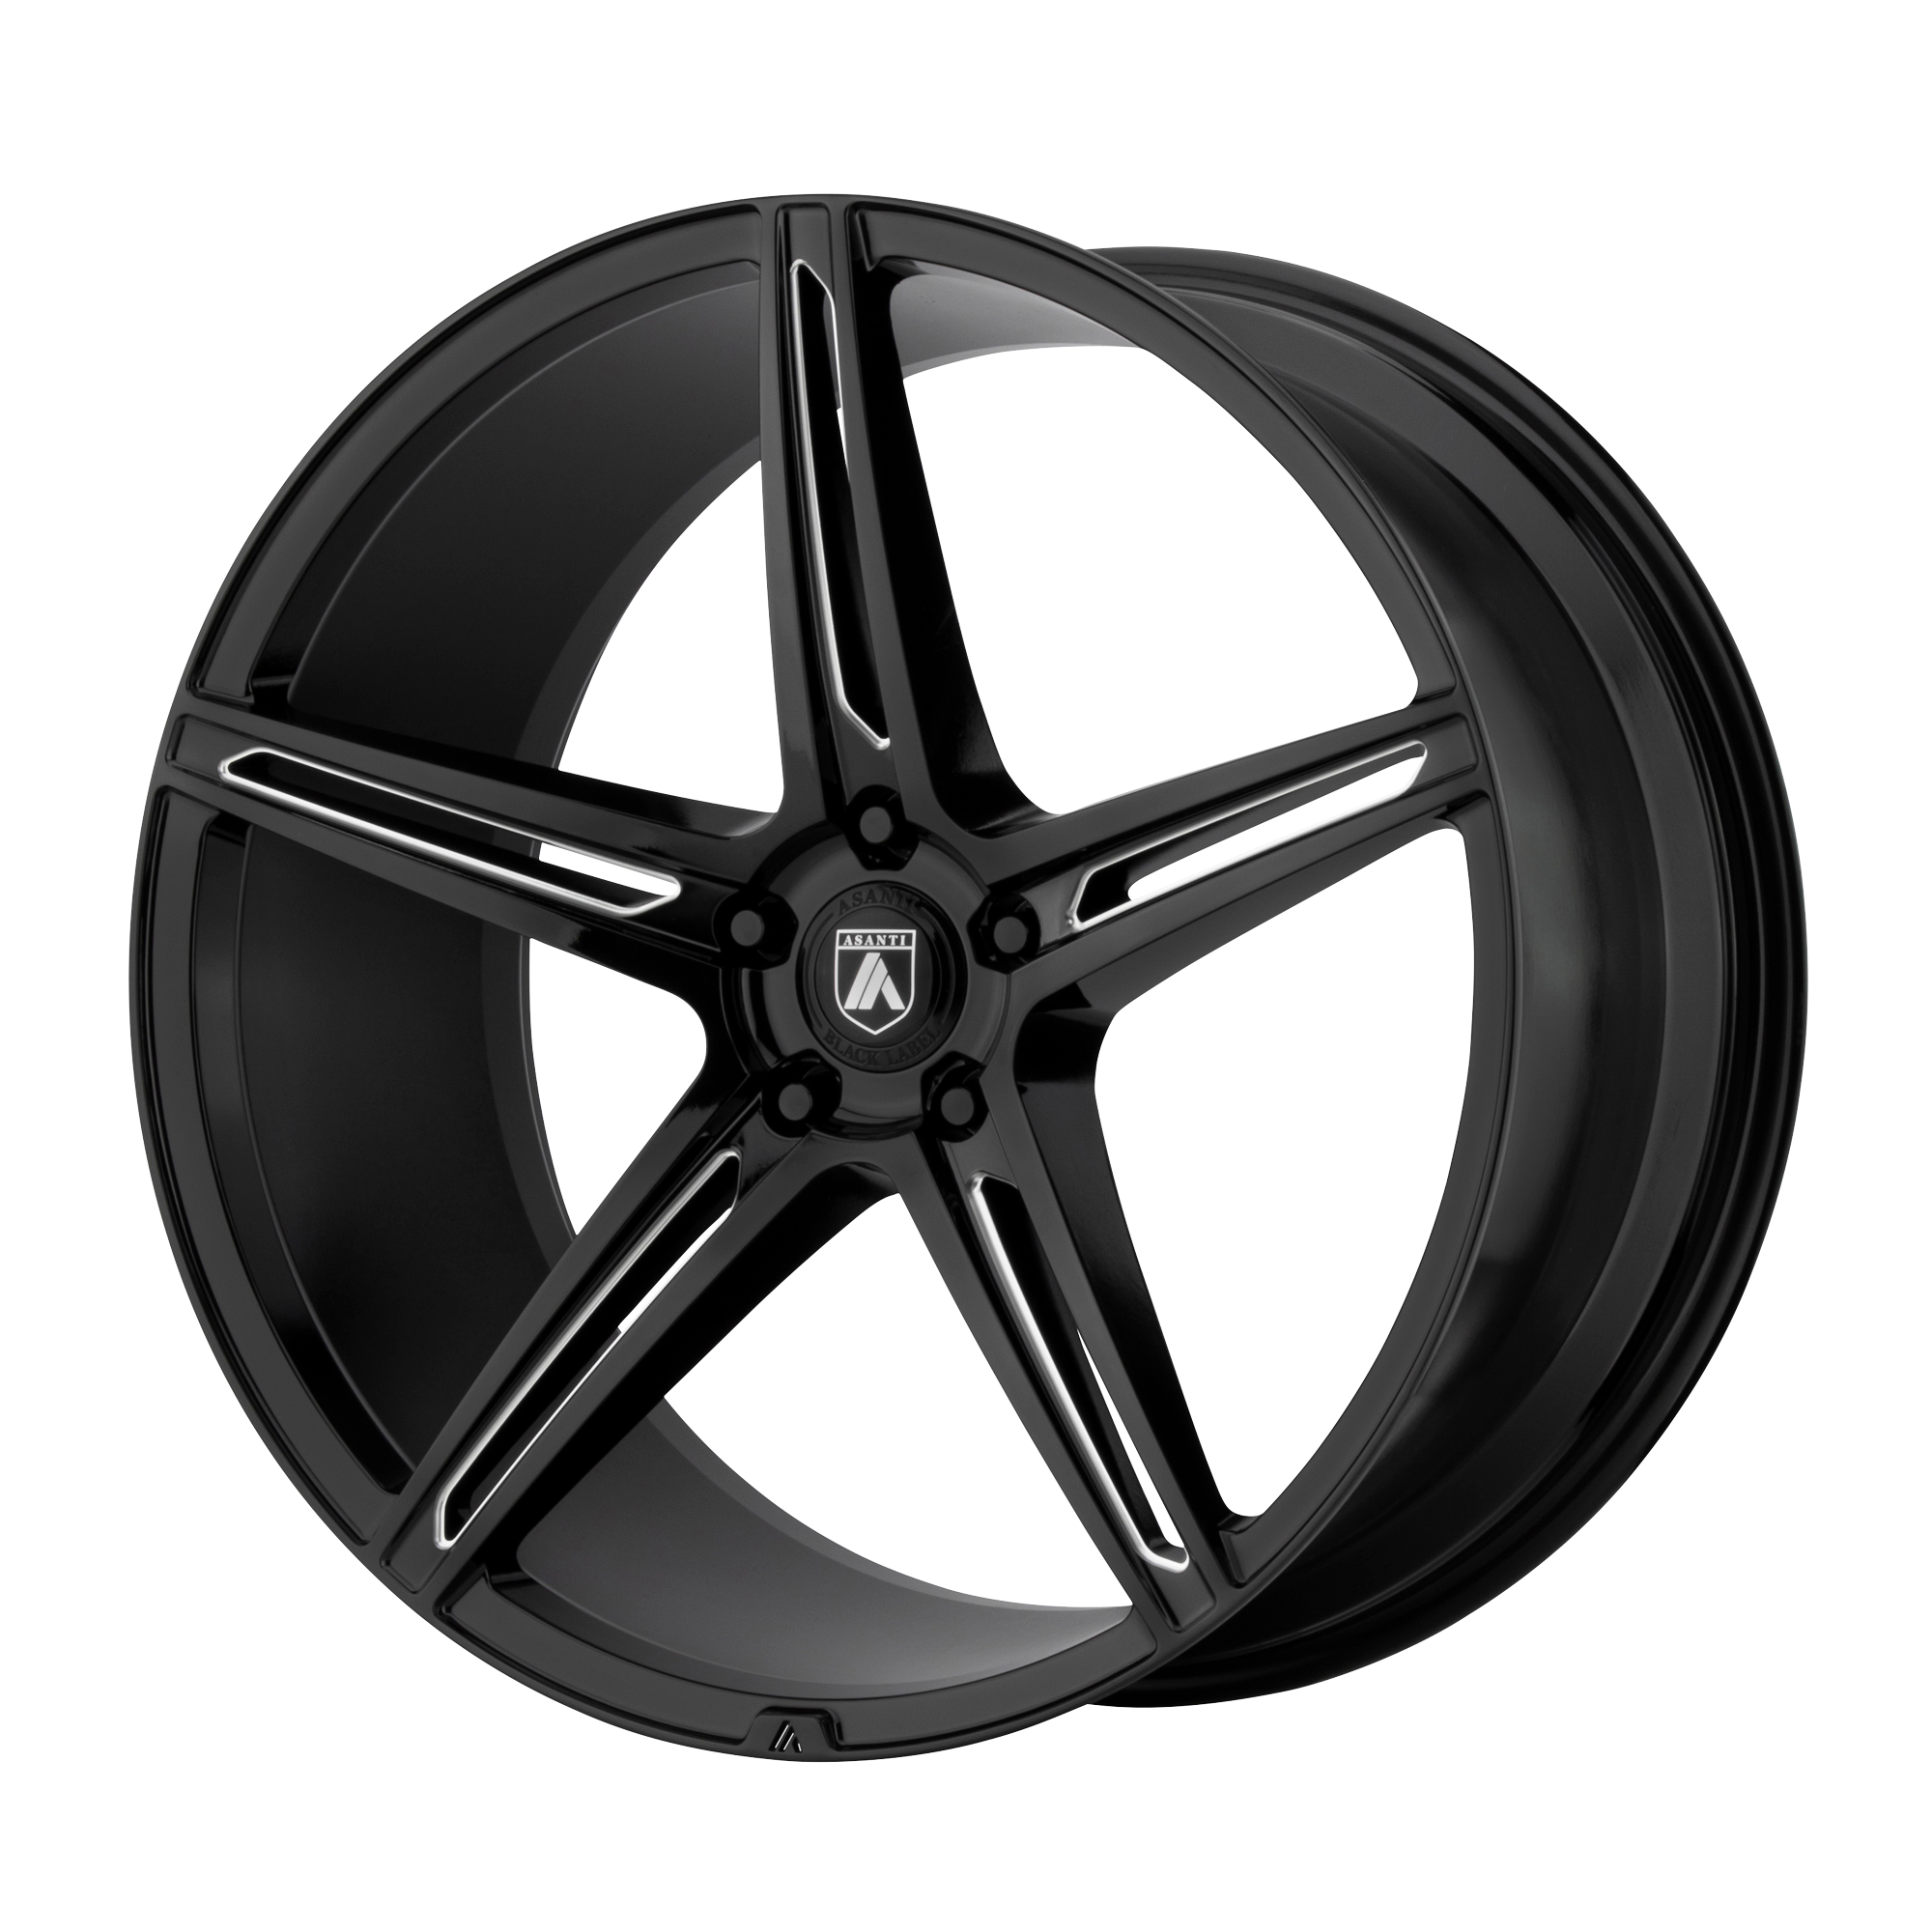 ALPHA 5 20x10.5 5x112.00 GLOSS BLACK MILLED (38 mm) - Tires and Engine Performance